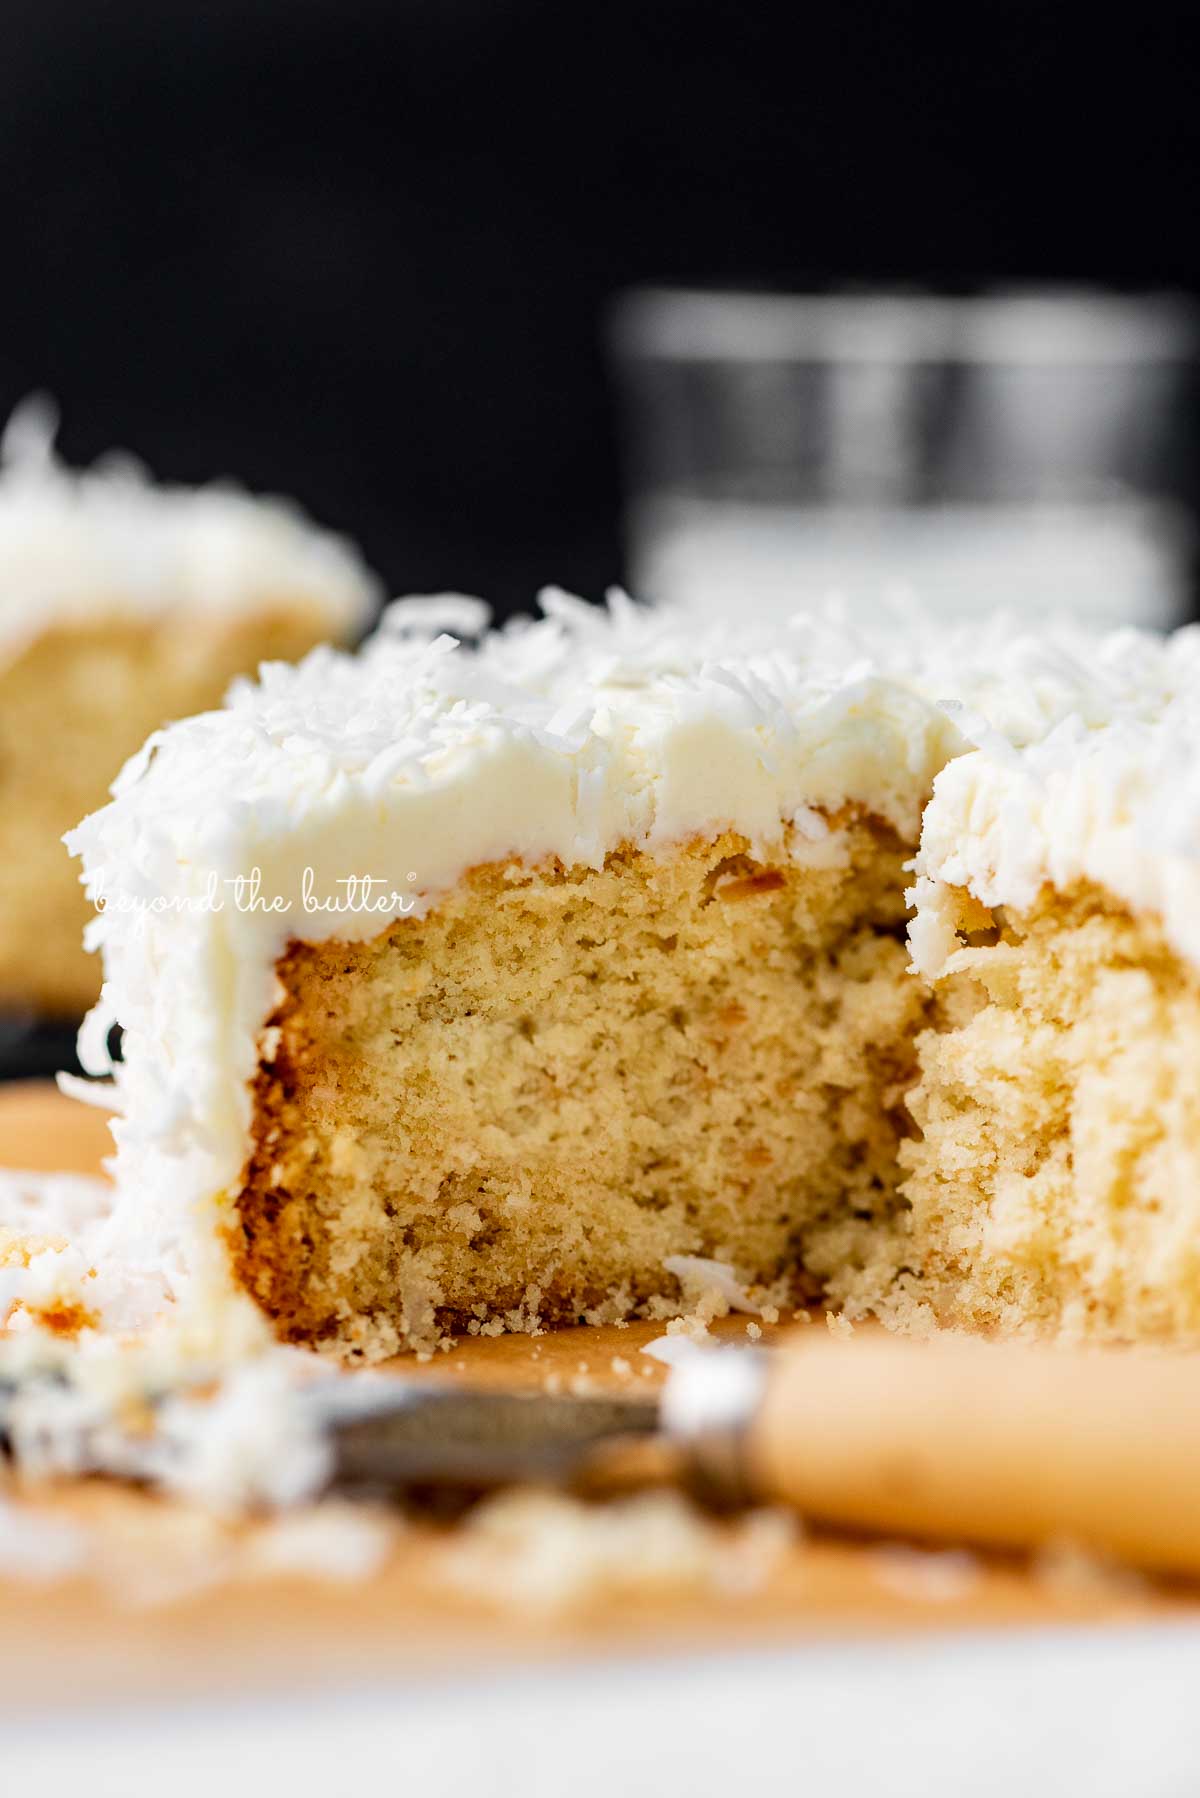 Sliced single layer coconut cake with black background | © Beyond the Butter®